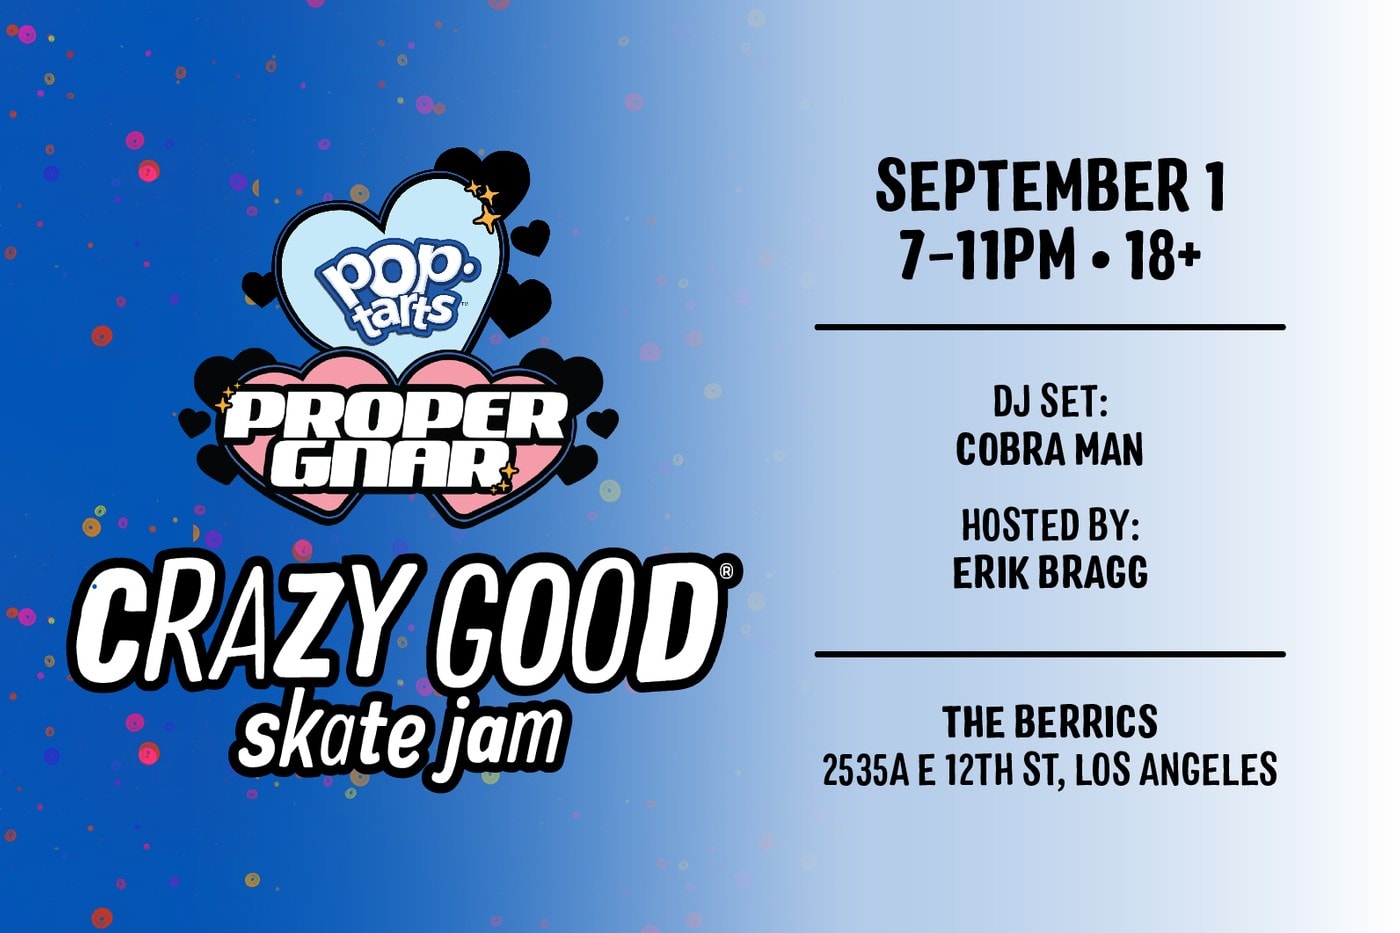 Hypebeast and Pop-Tarts Invite You to the 'Crazy Good Skate Jam' at The Berrics